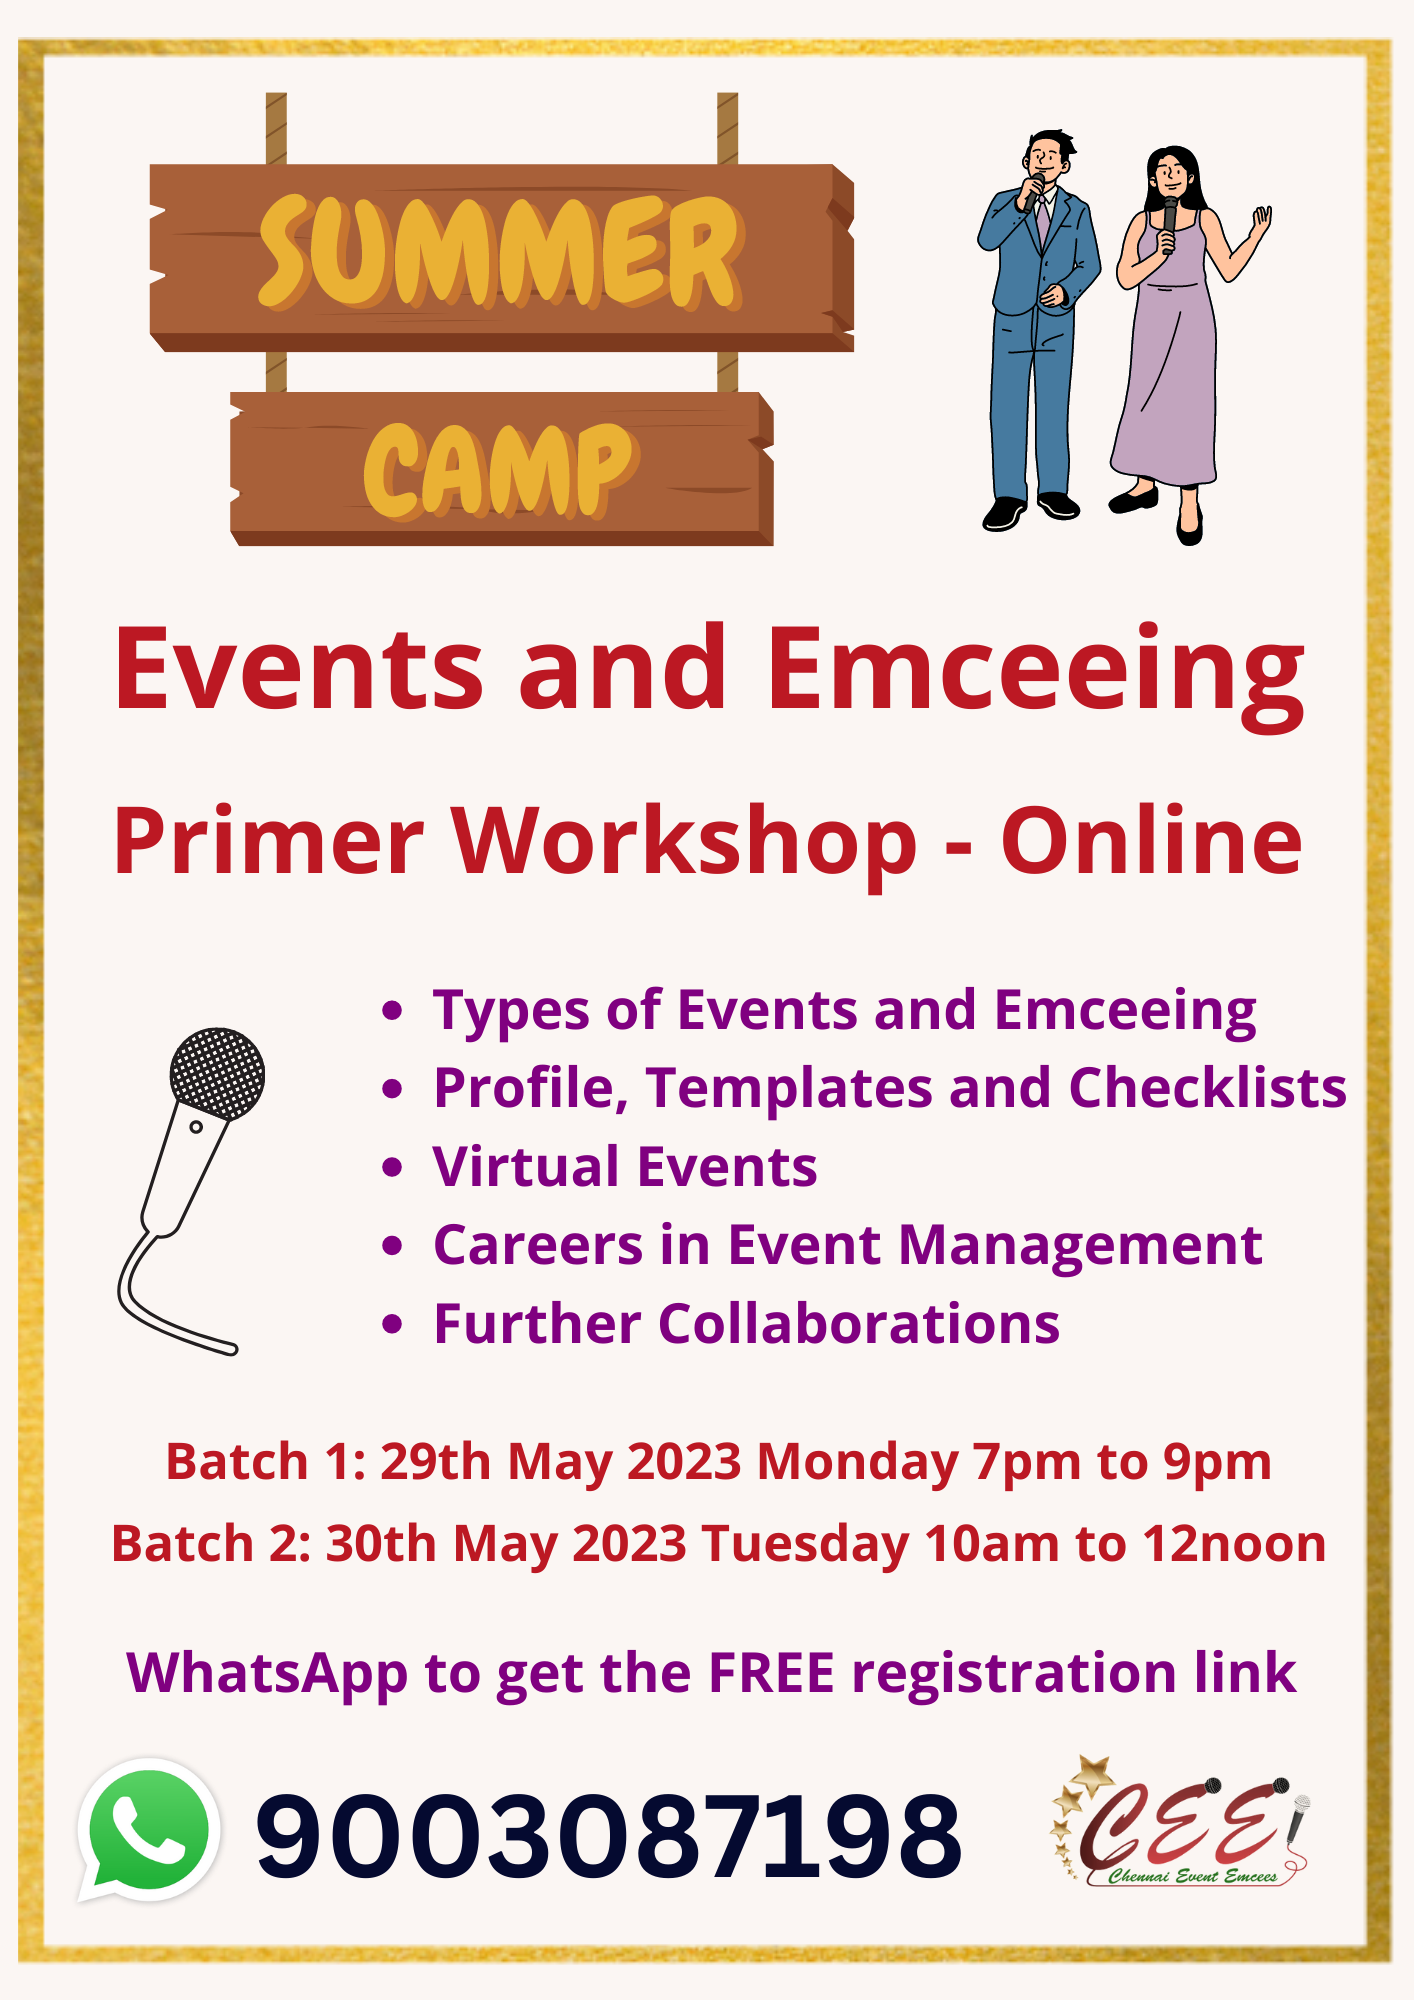 Events and Emceeing Training Online Summer Camp by Chennai Event Emcees